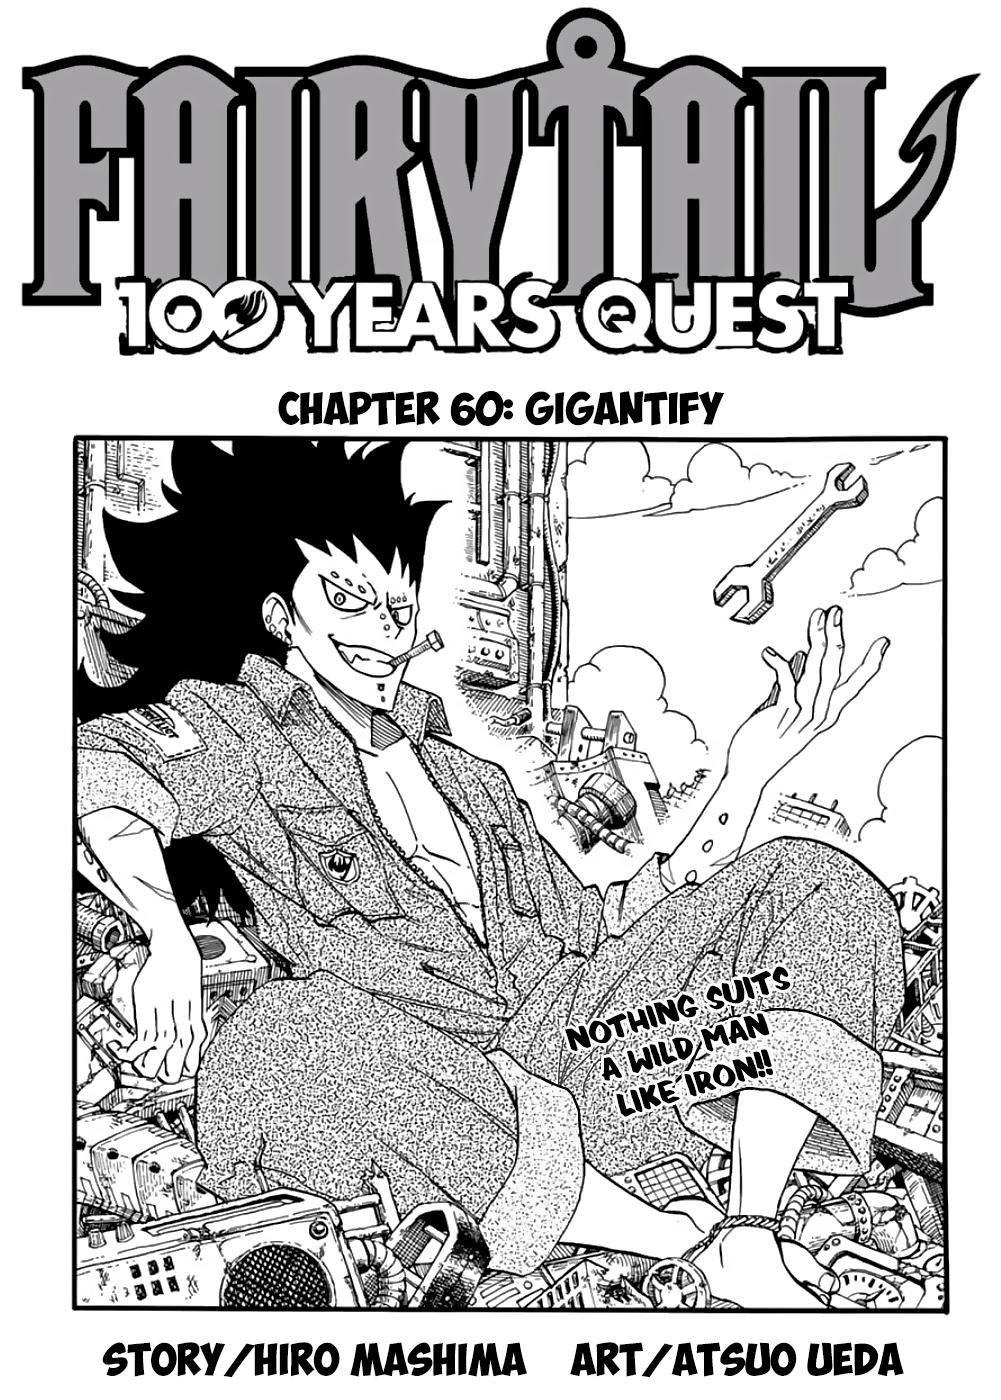 Read Fairy Tail 100 Years Quest Chapter 60 Manga Online For Free Kissmangas Com